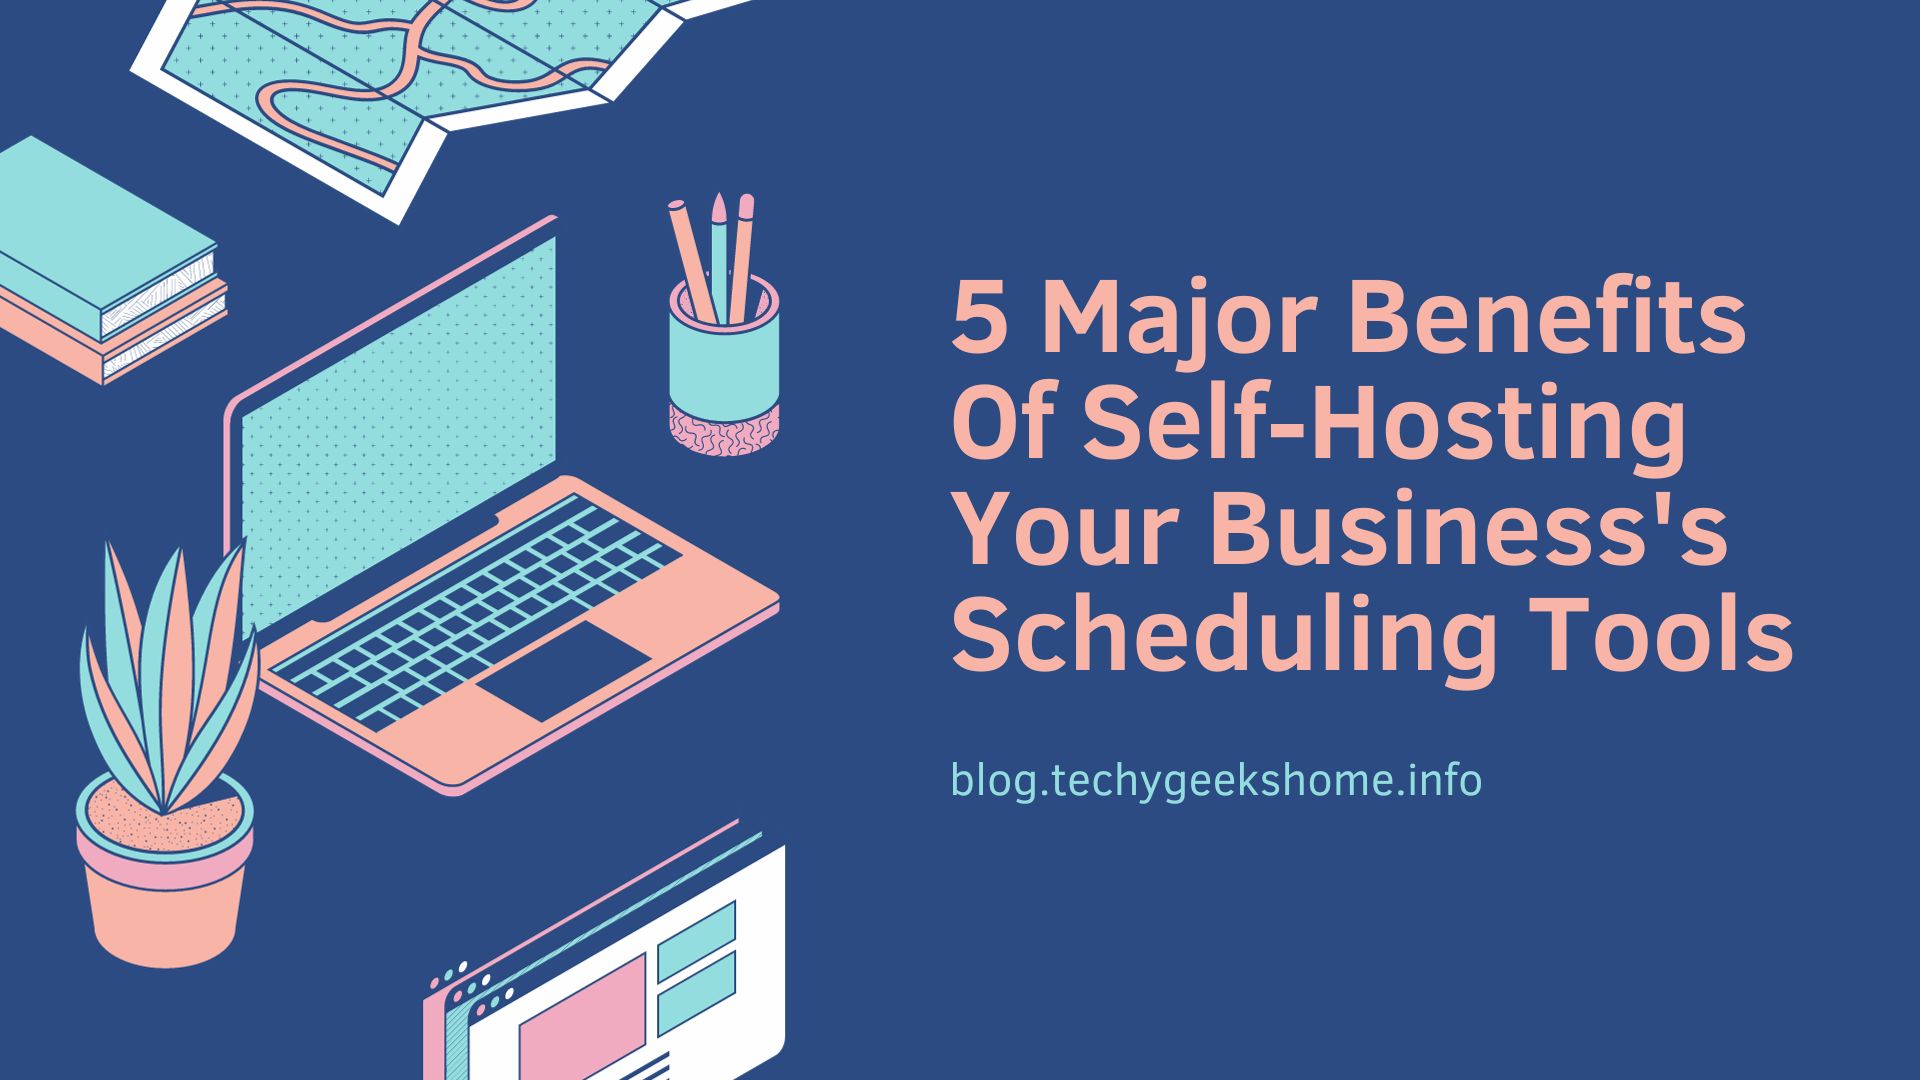 5 Major Benefits Of Self-Hosting Your Business’s Scheduling Tools